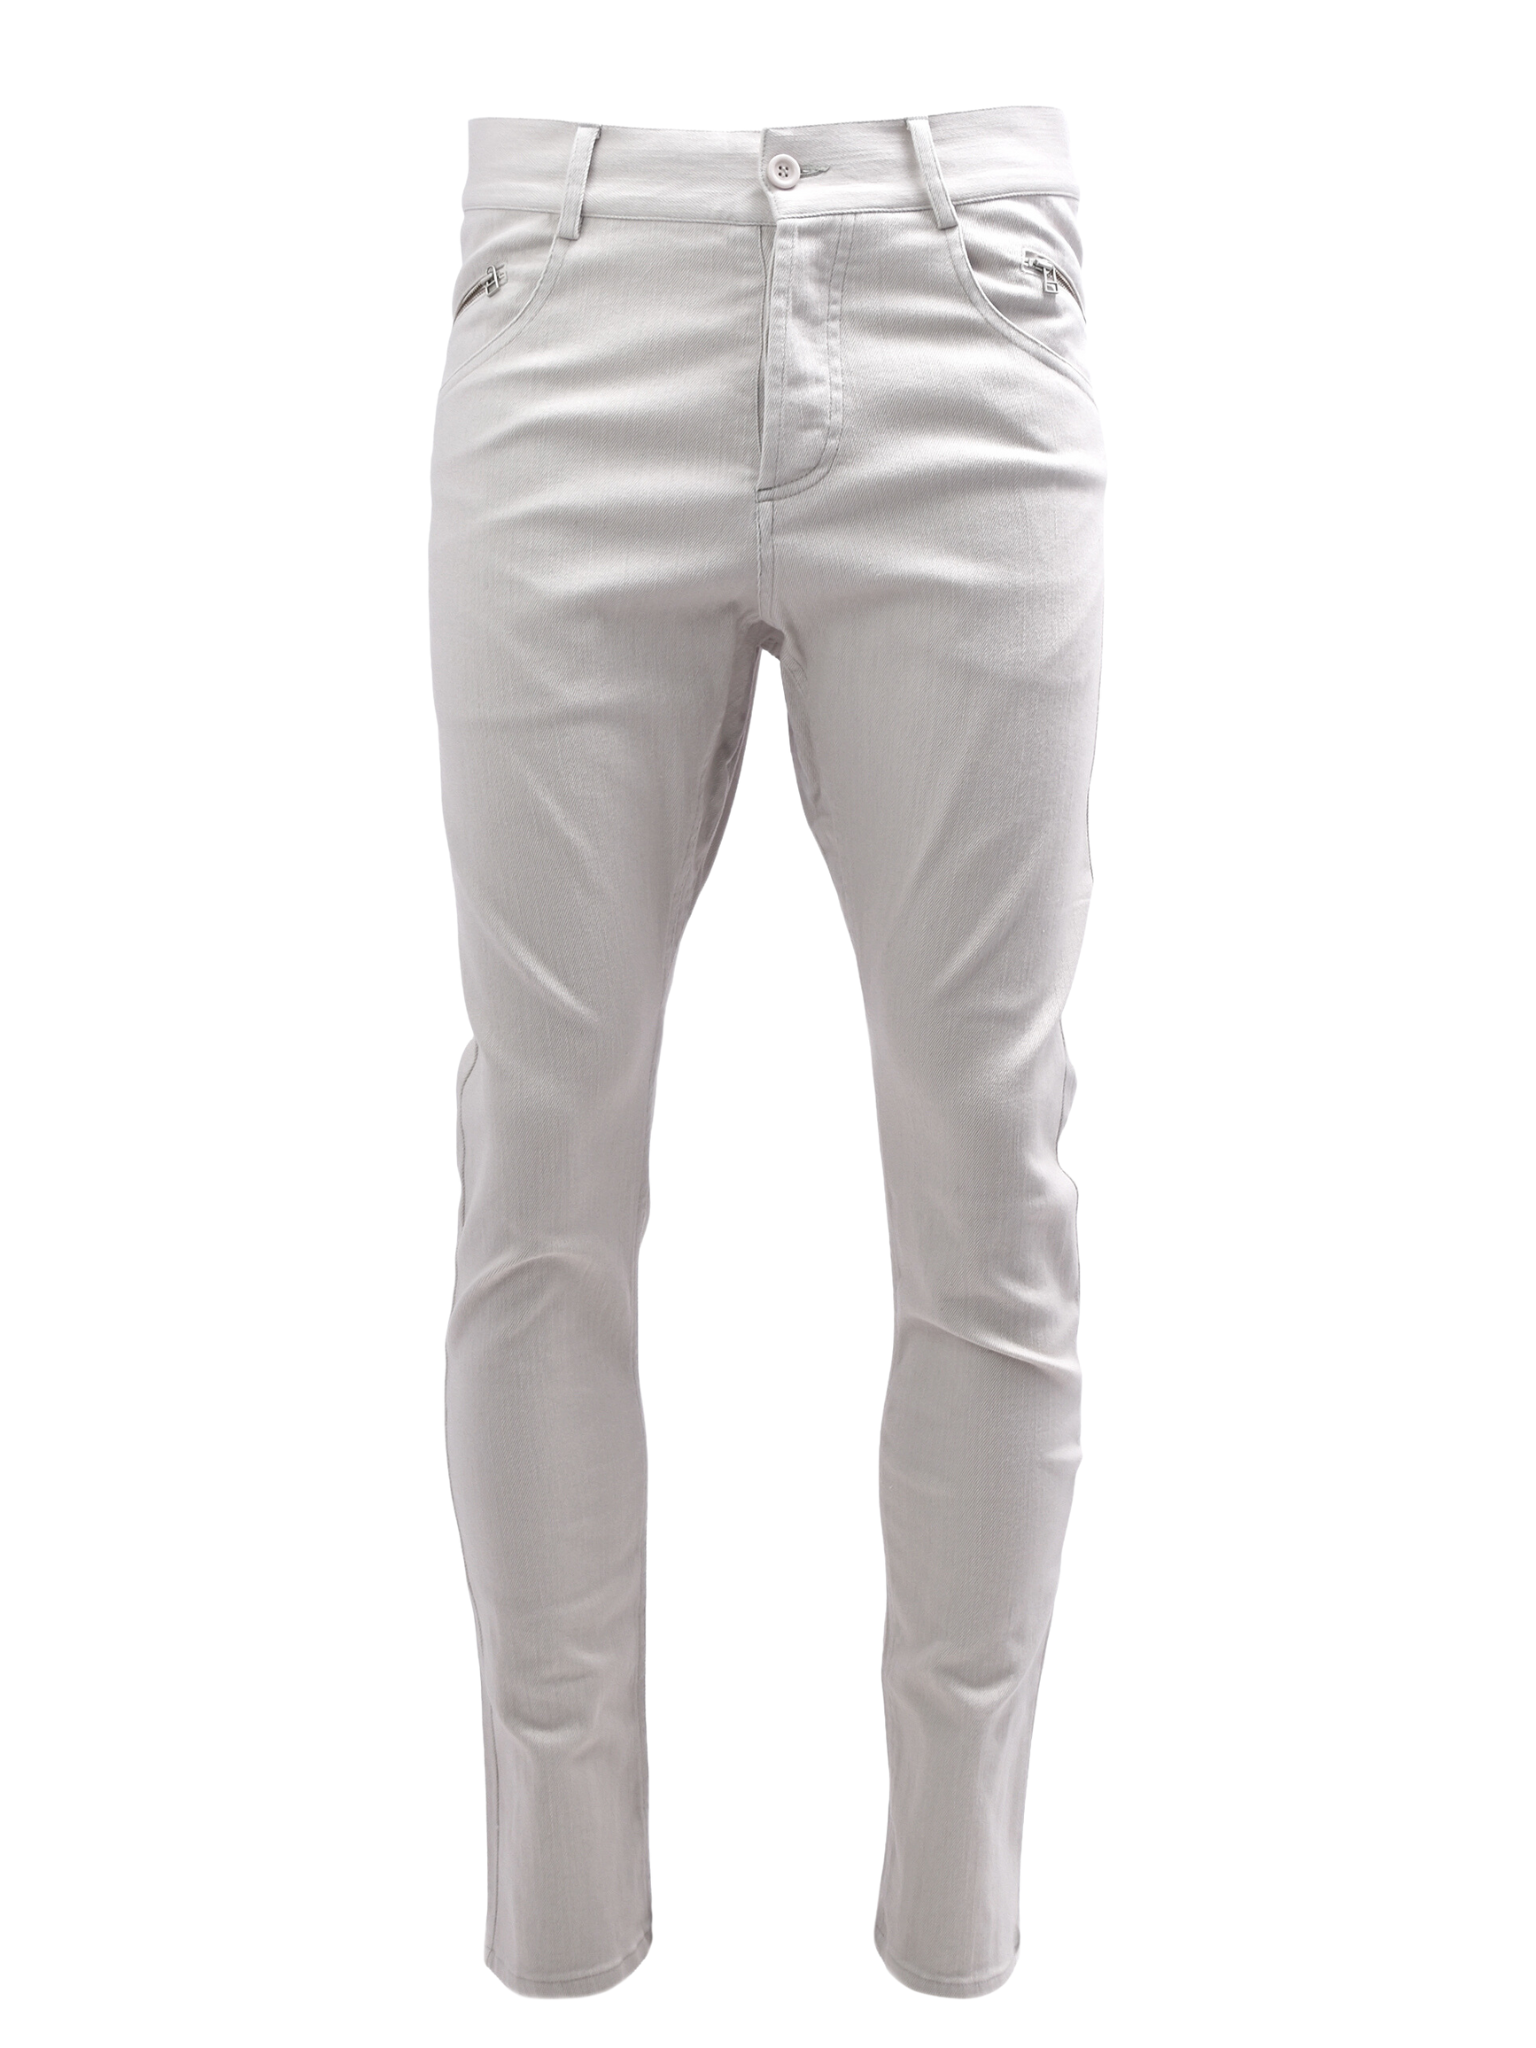 OFF WHITE JEANS WITH LEG ZIP